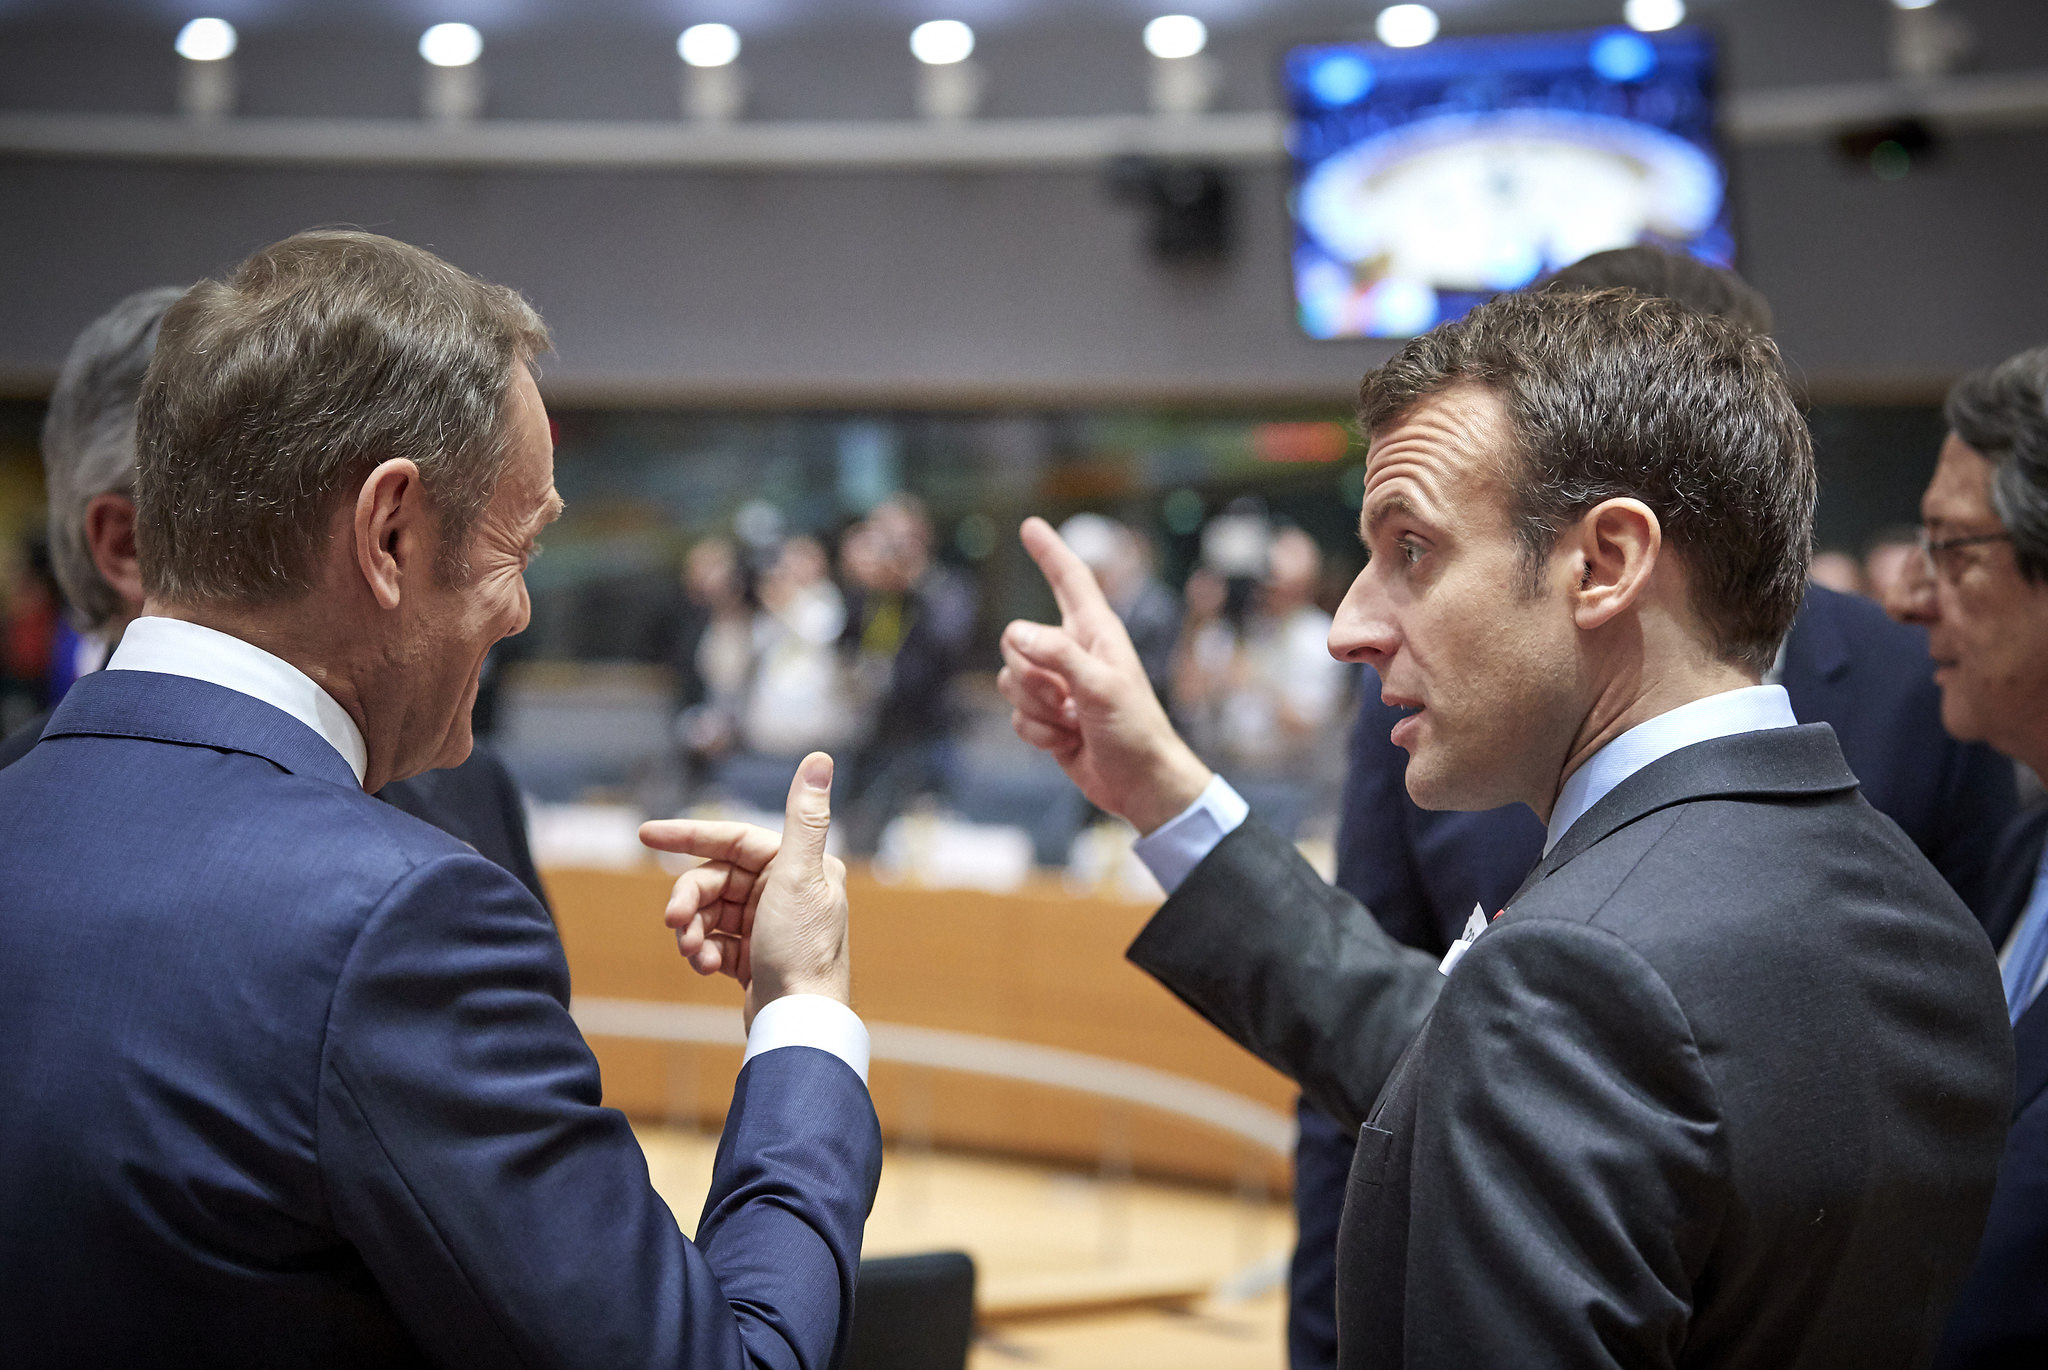 President Tusk at the European Council meeting - European Council President